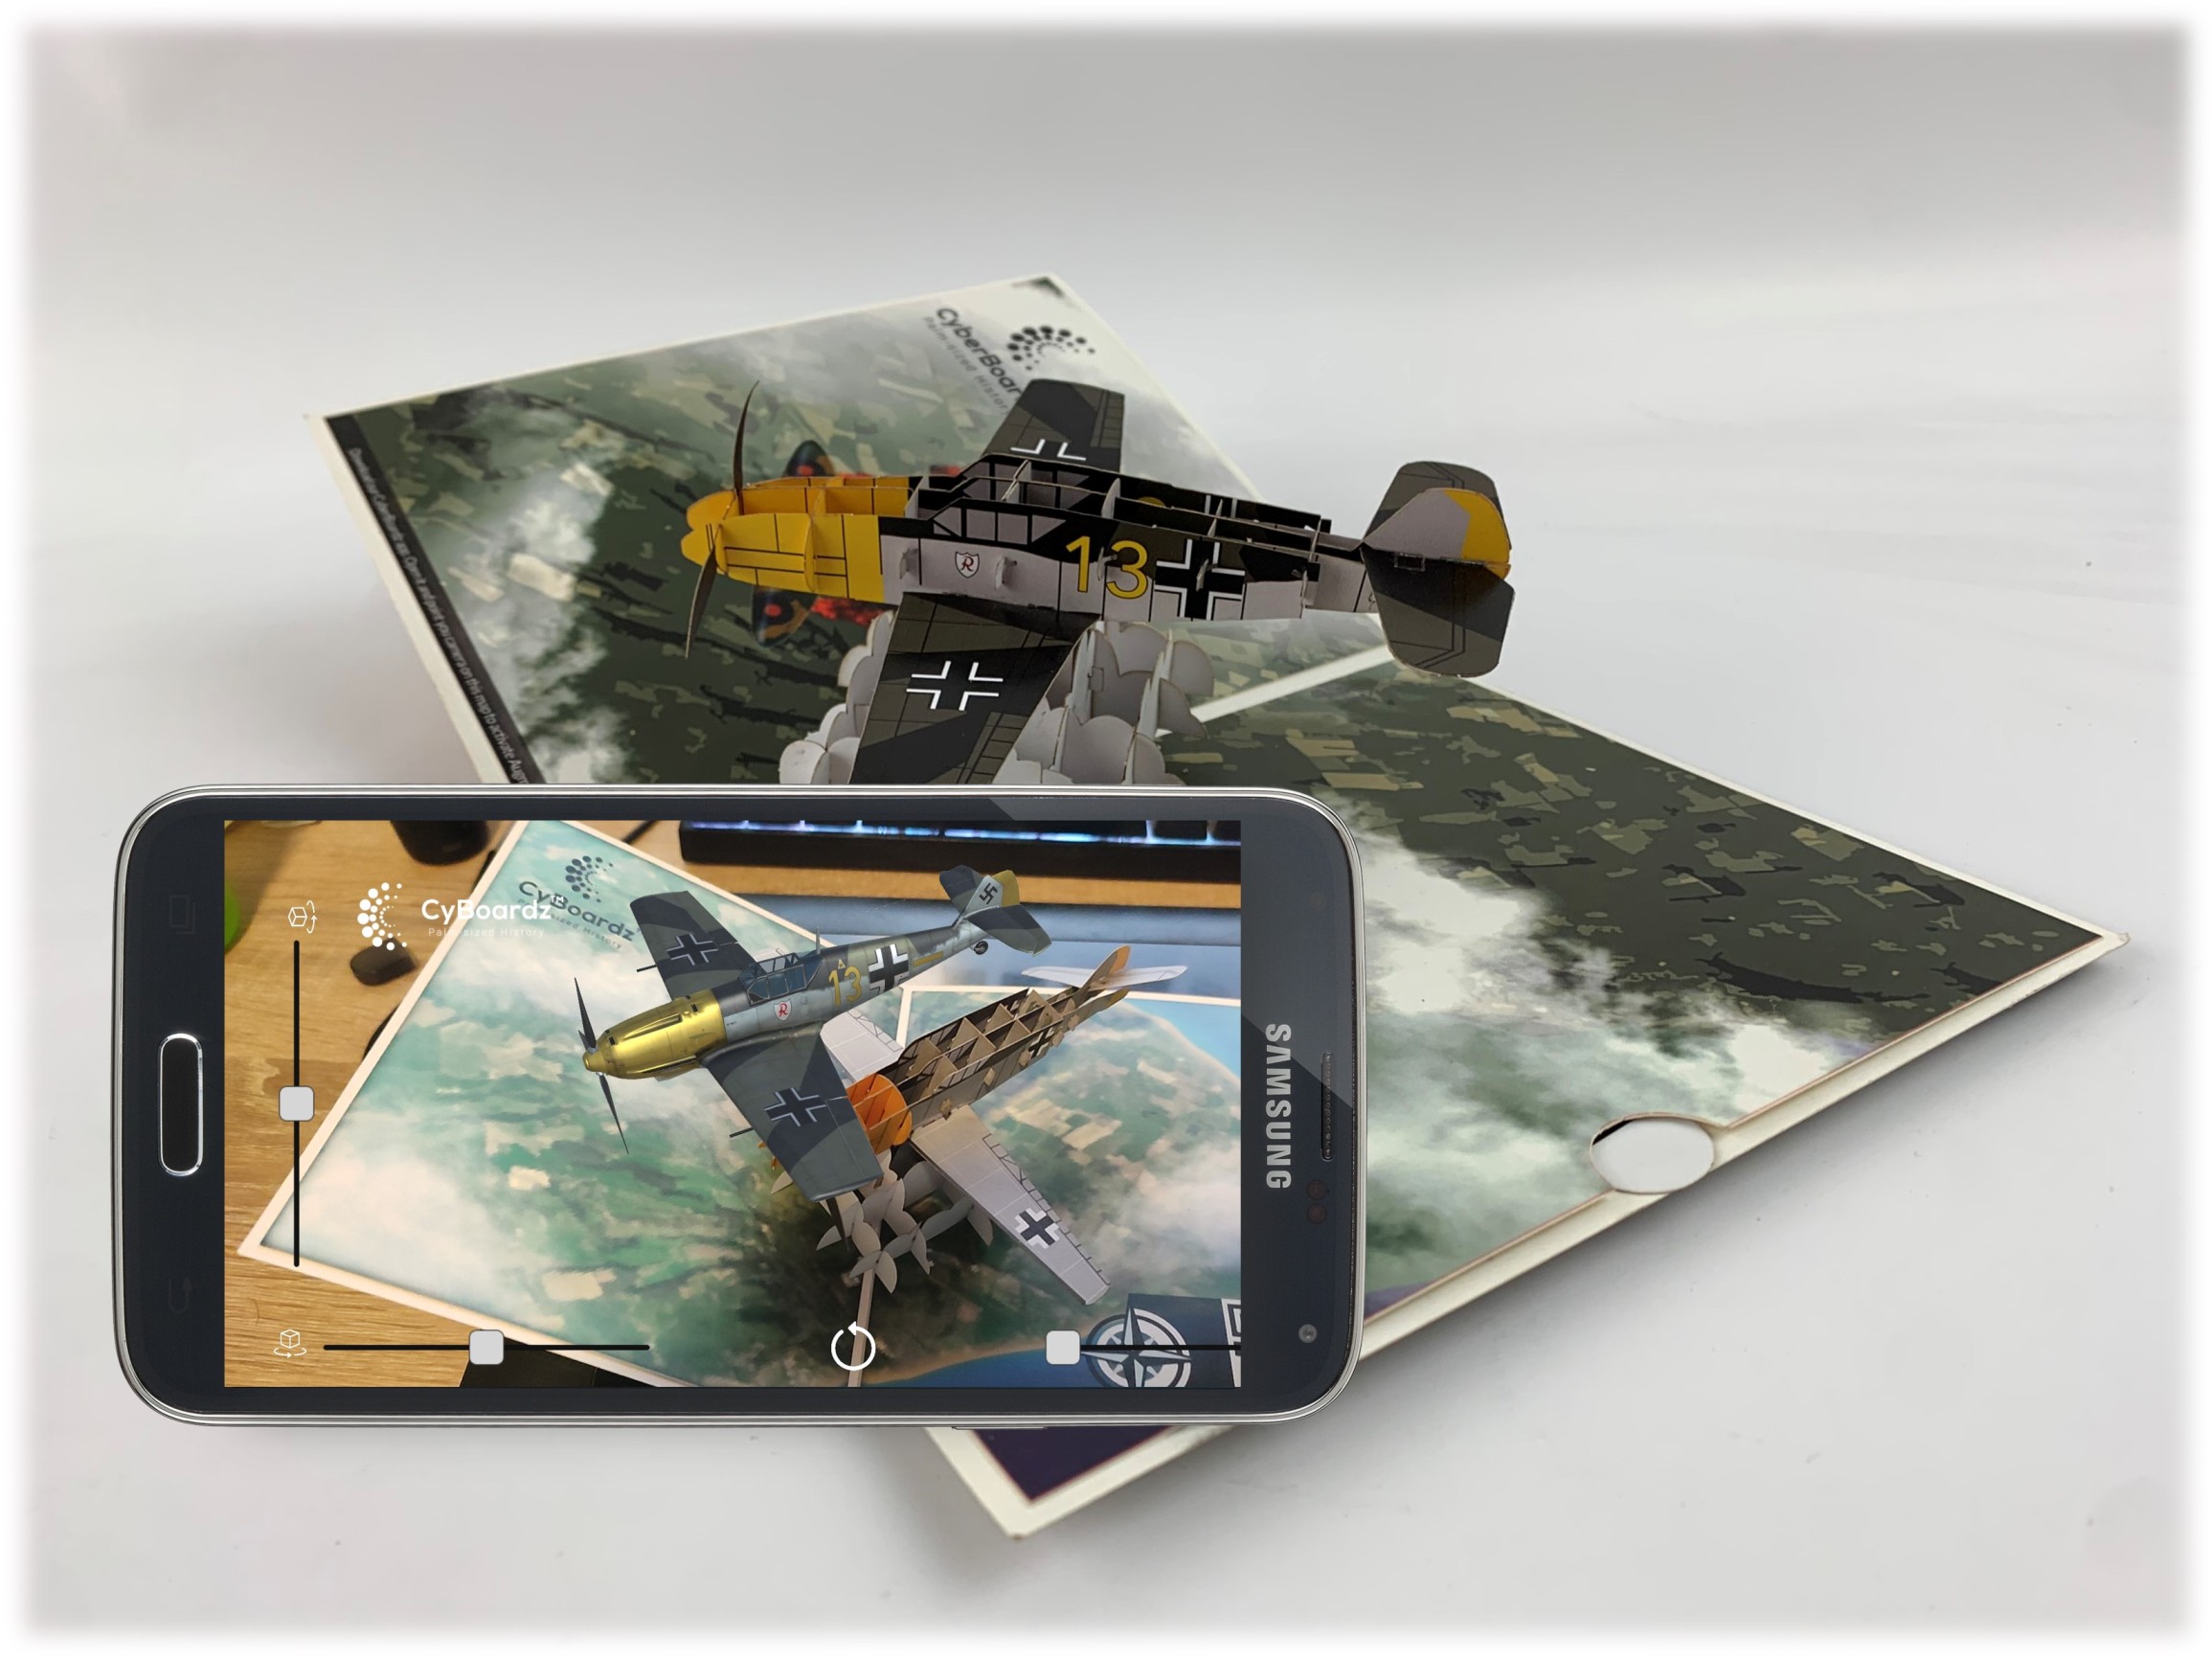  3D Aircraft Collectible Cards Make Great Gifts for Aviation Lovers